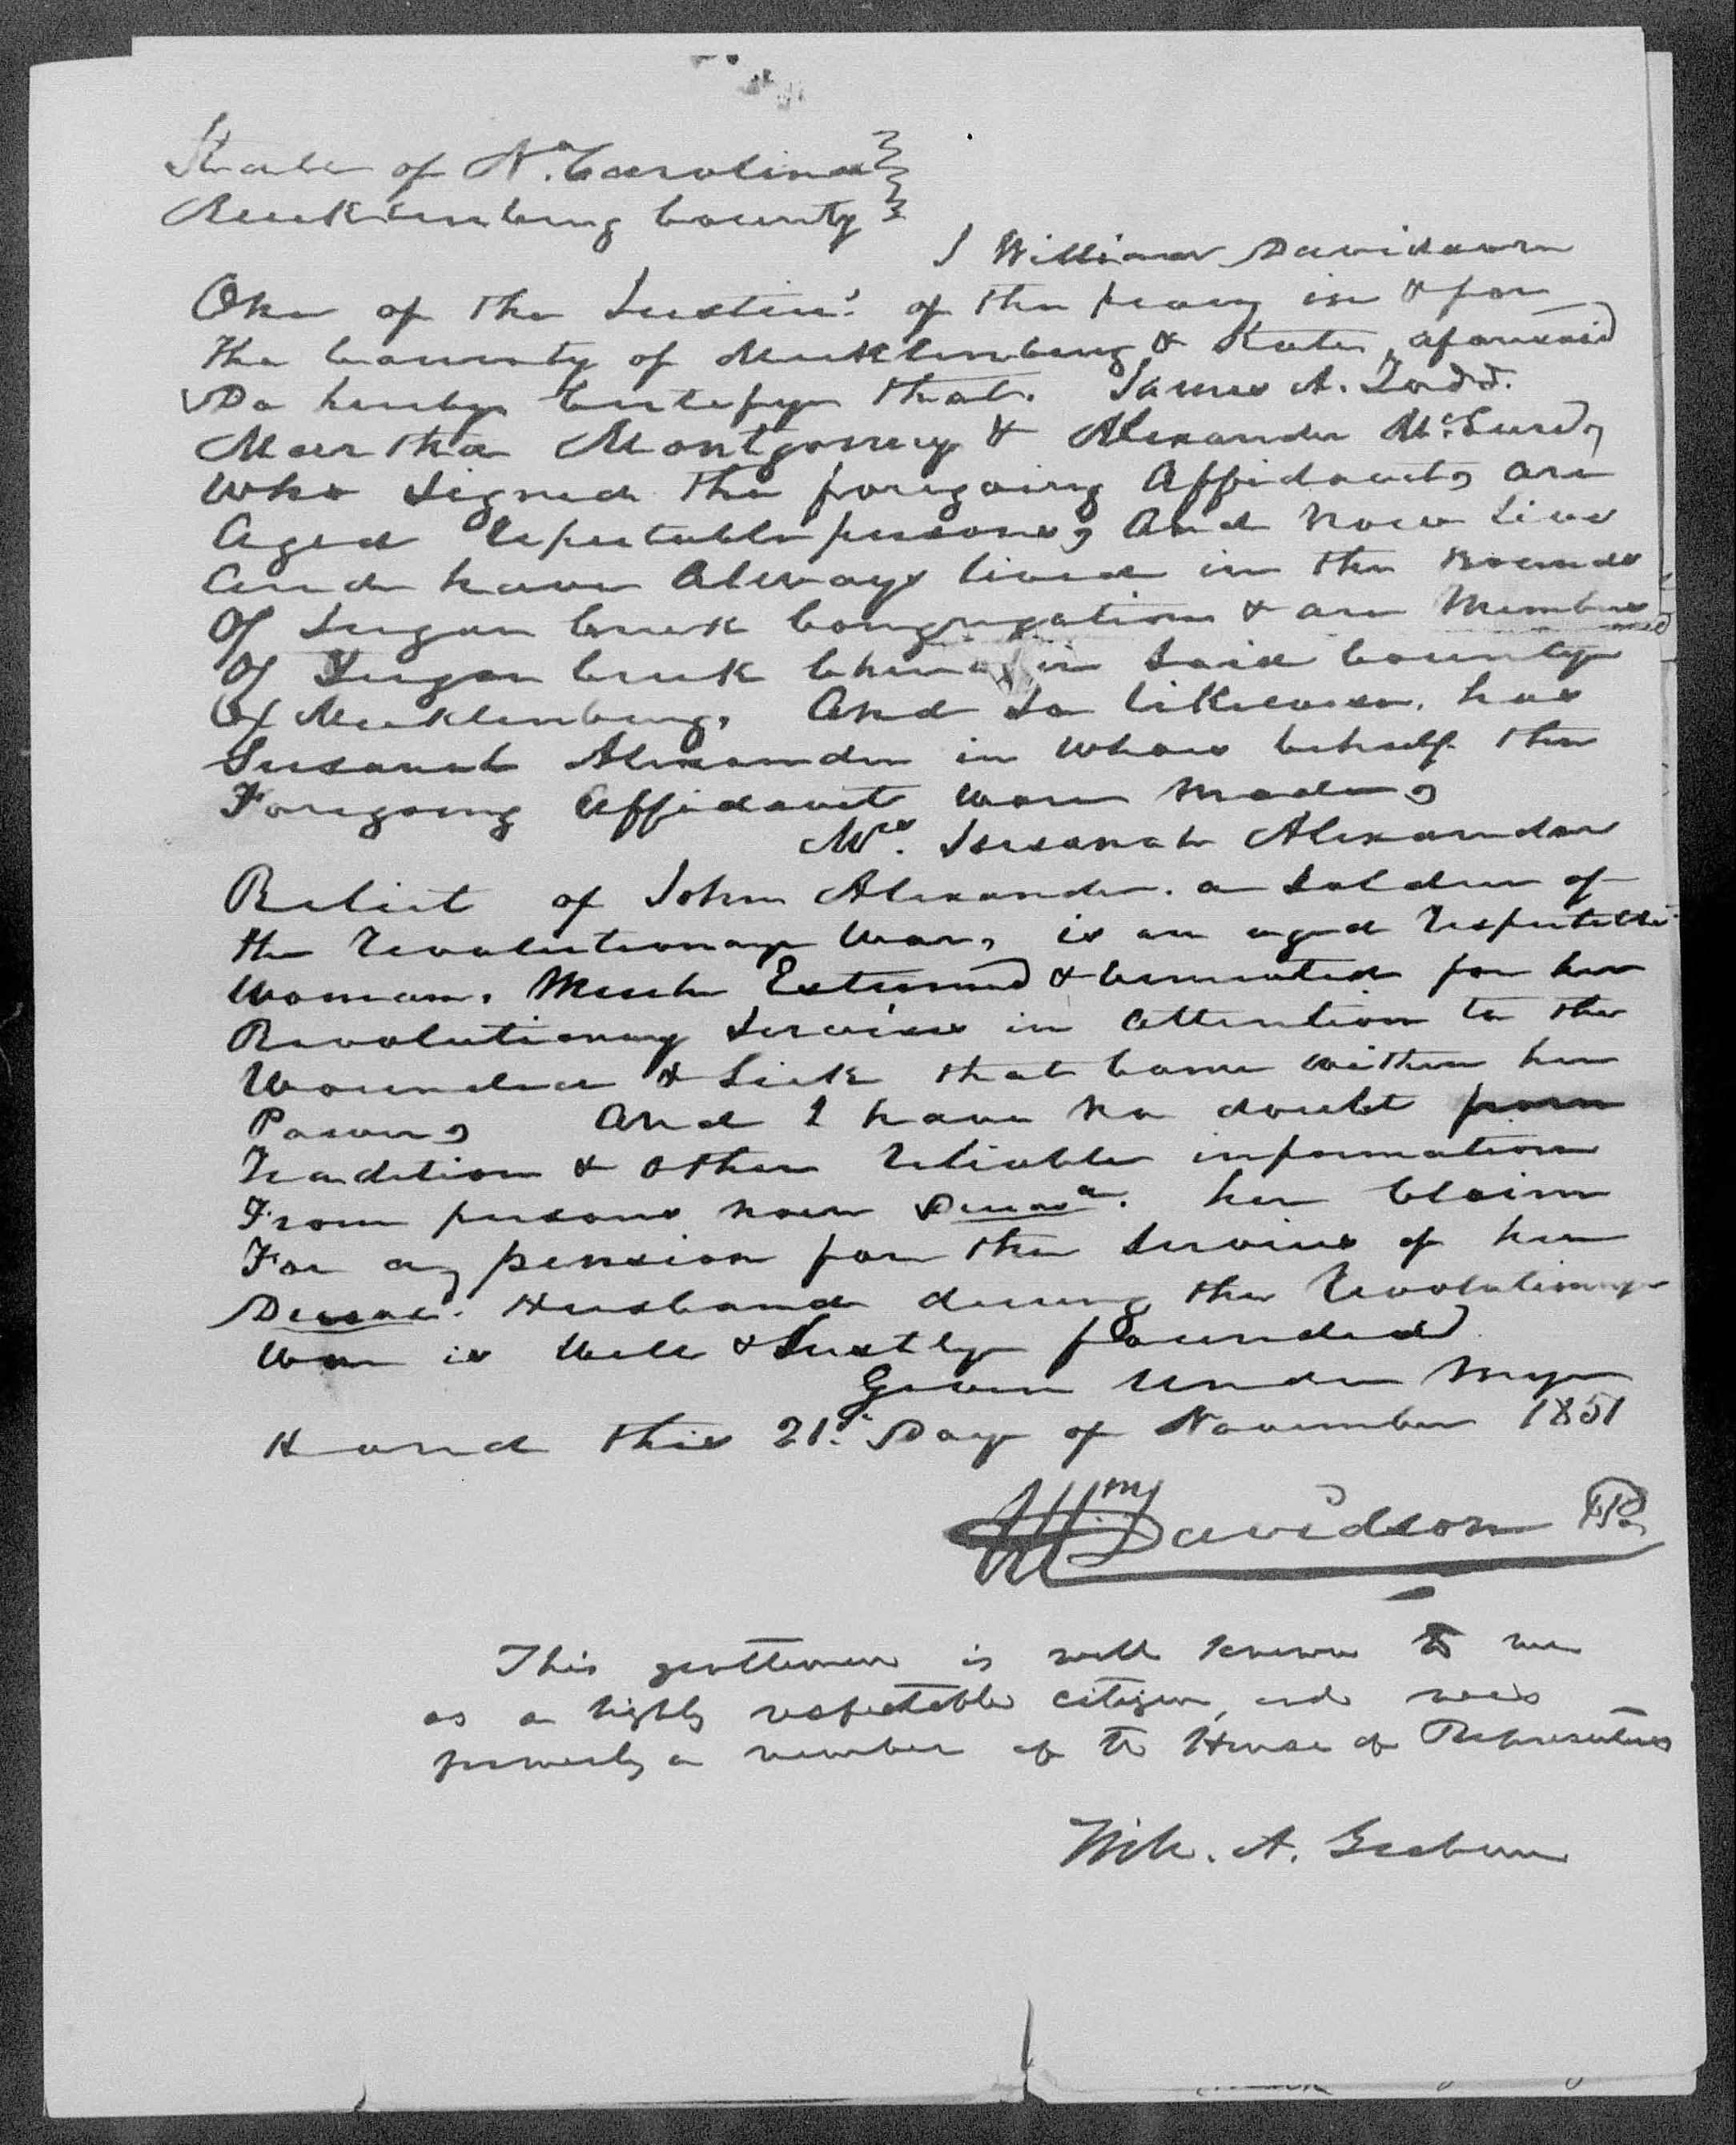 Affidavit of James A. Todd in support of a Pension Claim for Susana Alexander, 19 November 1851, page 3